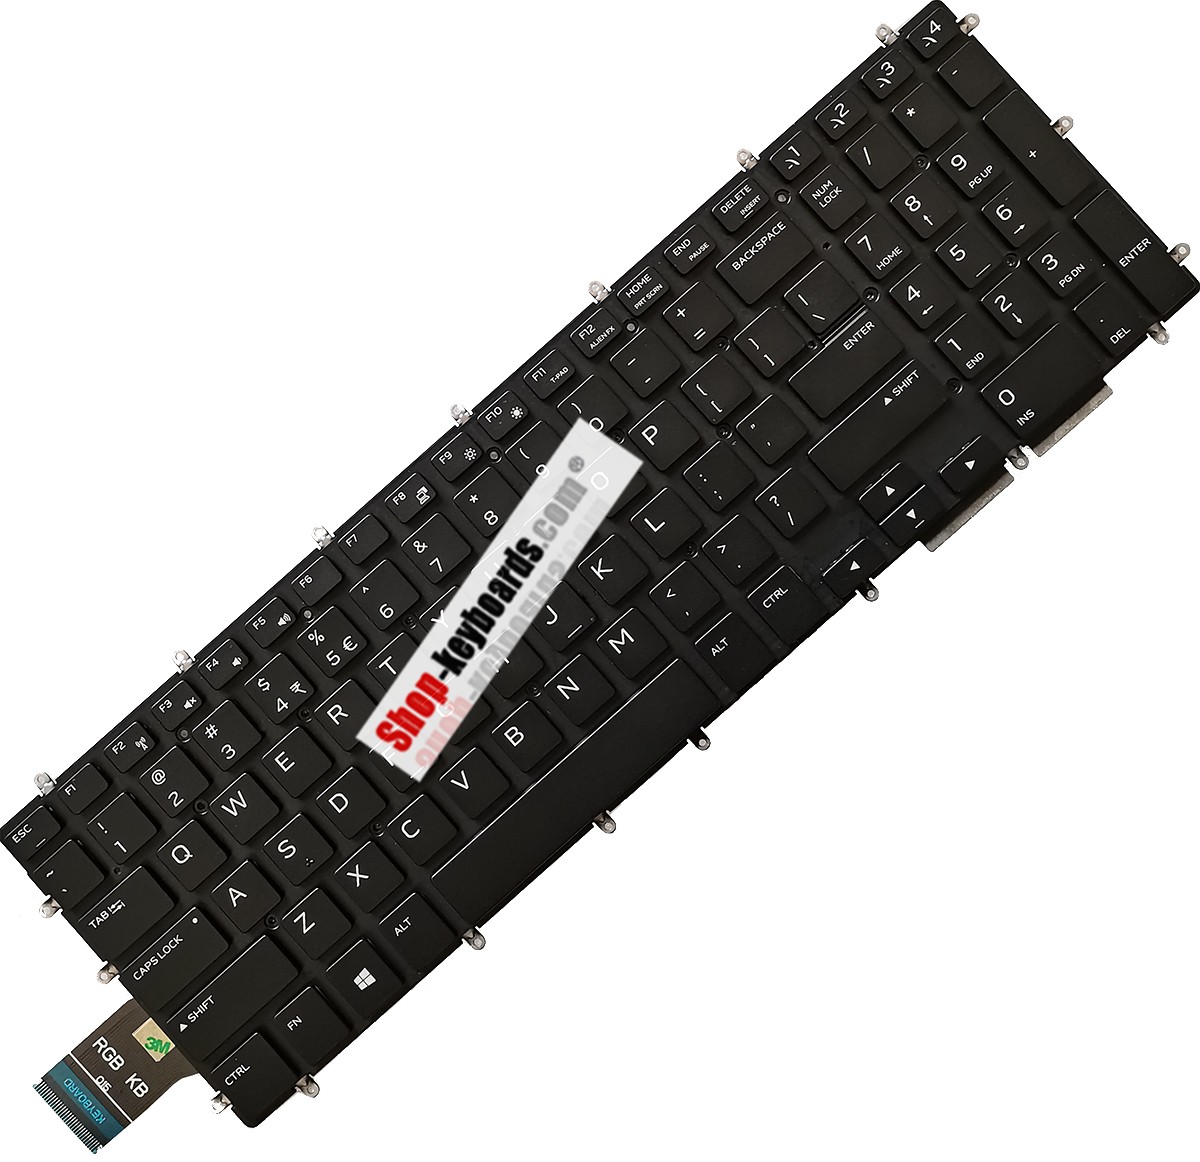 Dell 0KN4-0D1GE12 Keyboard replacement